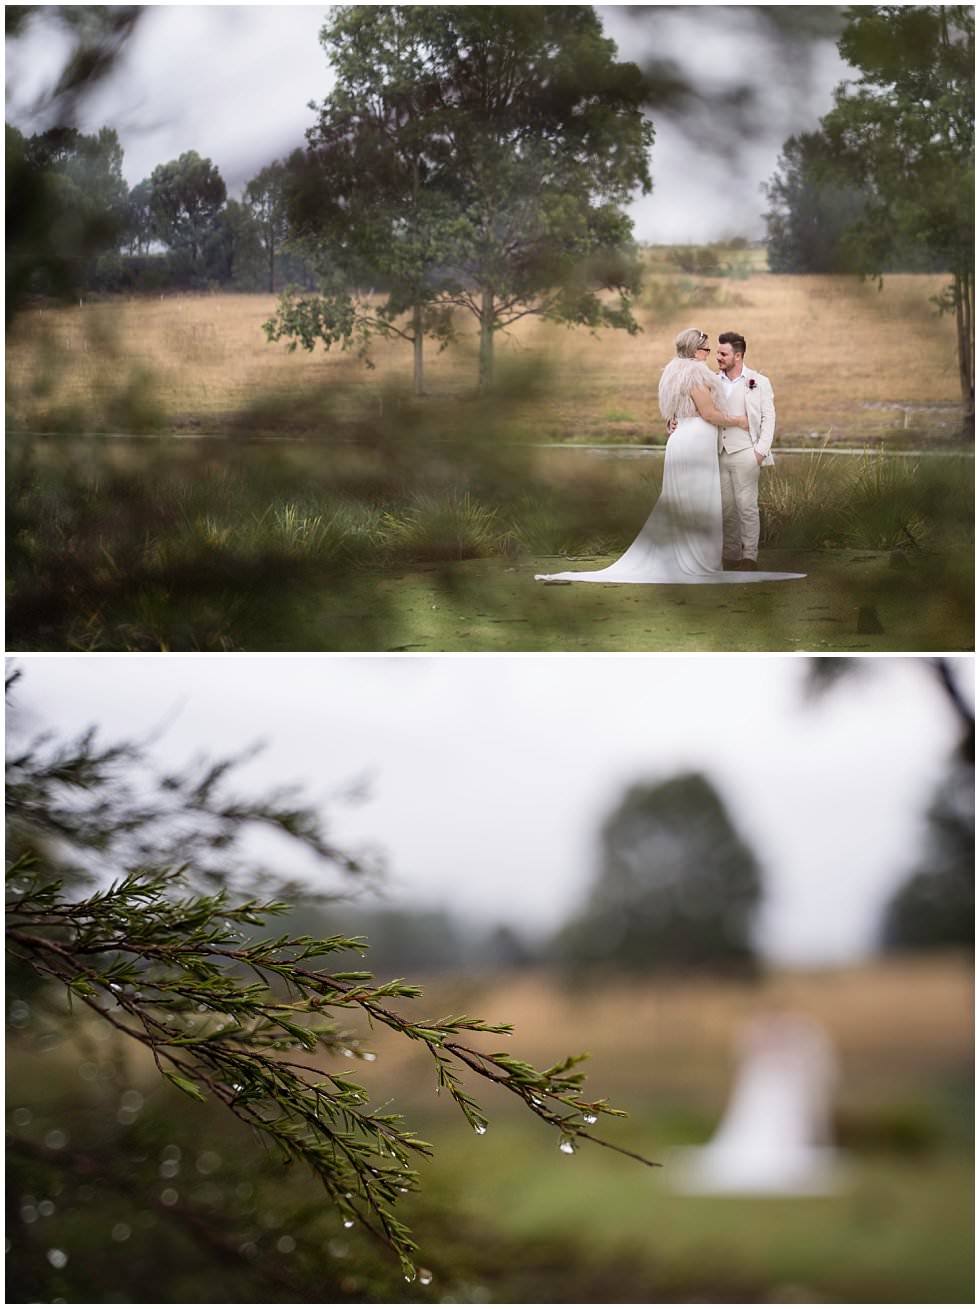 ArtyJ Photography | Autumn Wedding, Photographers, Affections Wedding &amp; Event Hire, Chateau Elan, The Vintage, The Carriage House, Trish Wise, Pokolbin, NSW, Hunter Valley, Bryce Noone Photography, Photography, photographer | Mia & Pete | Wedding